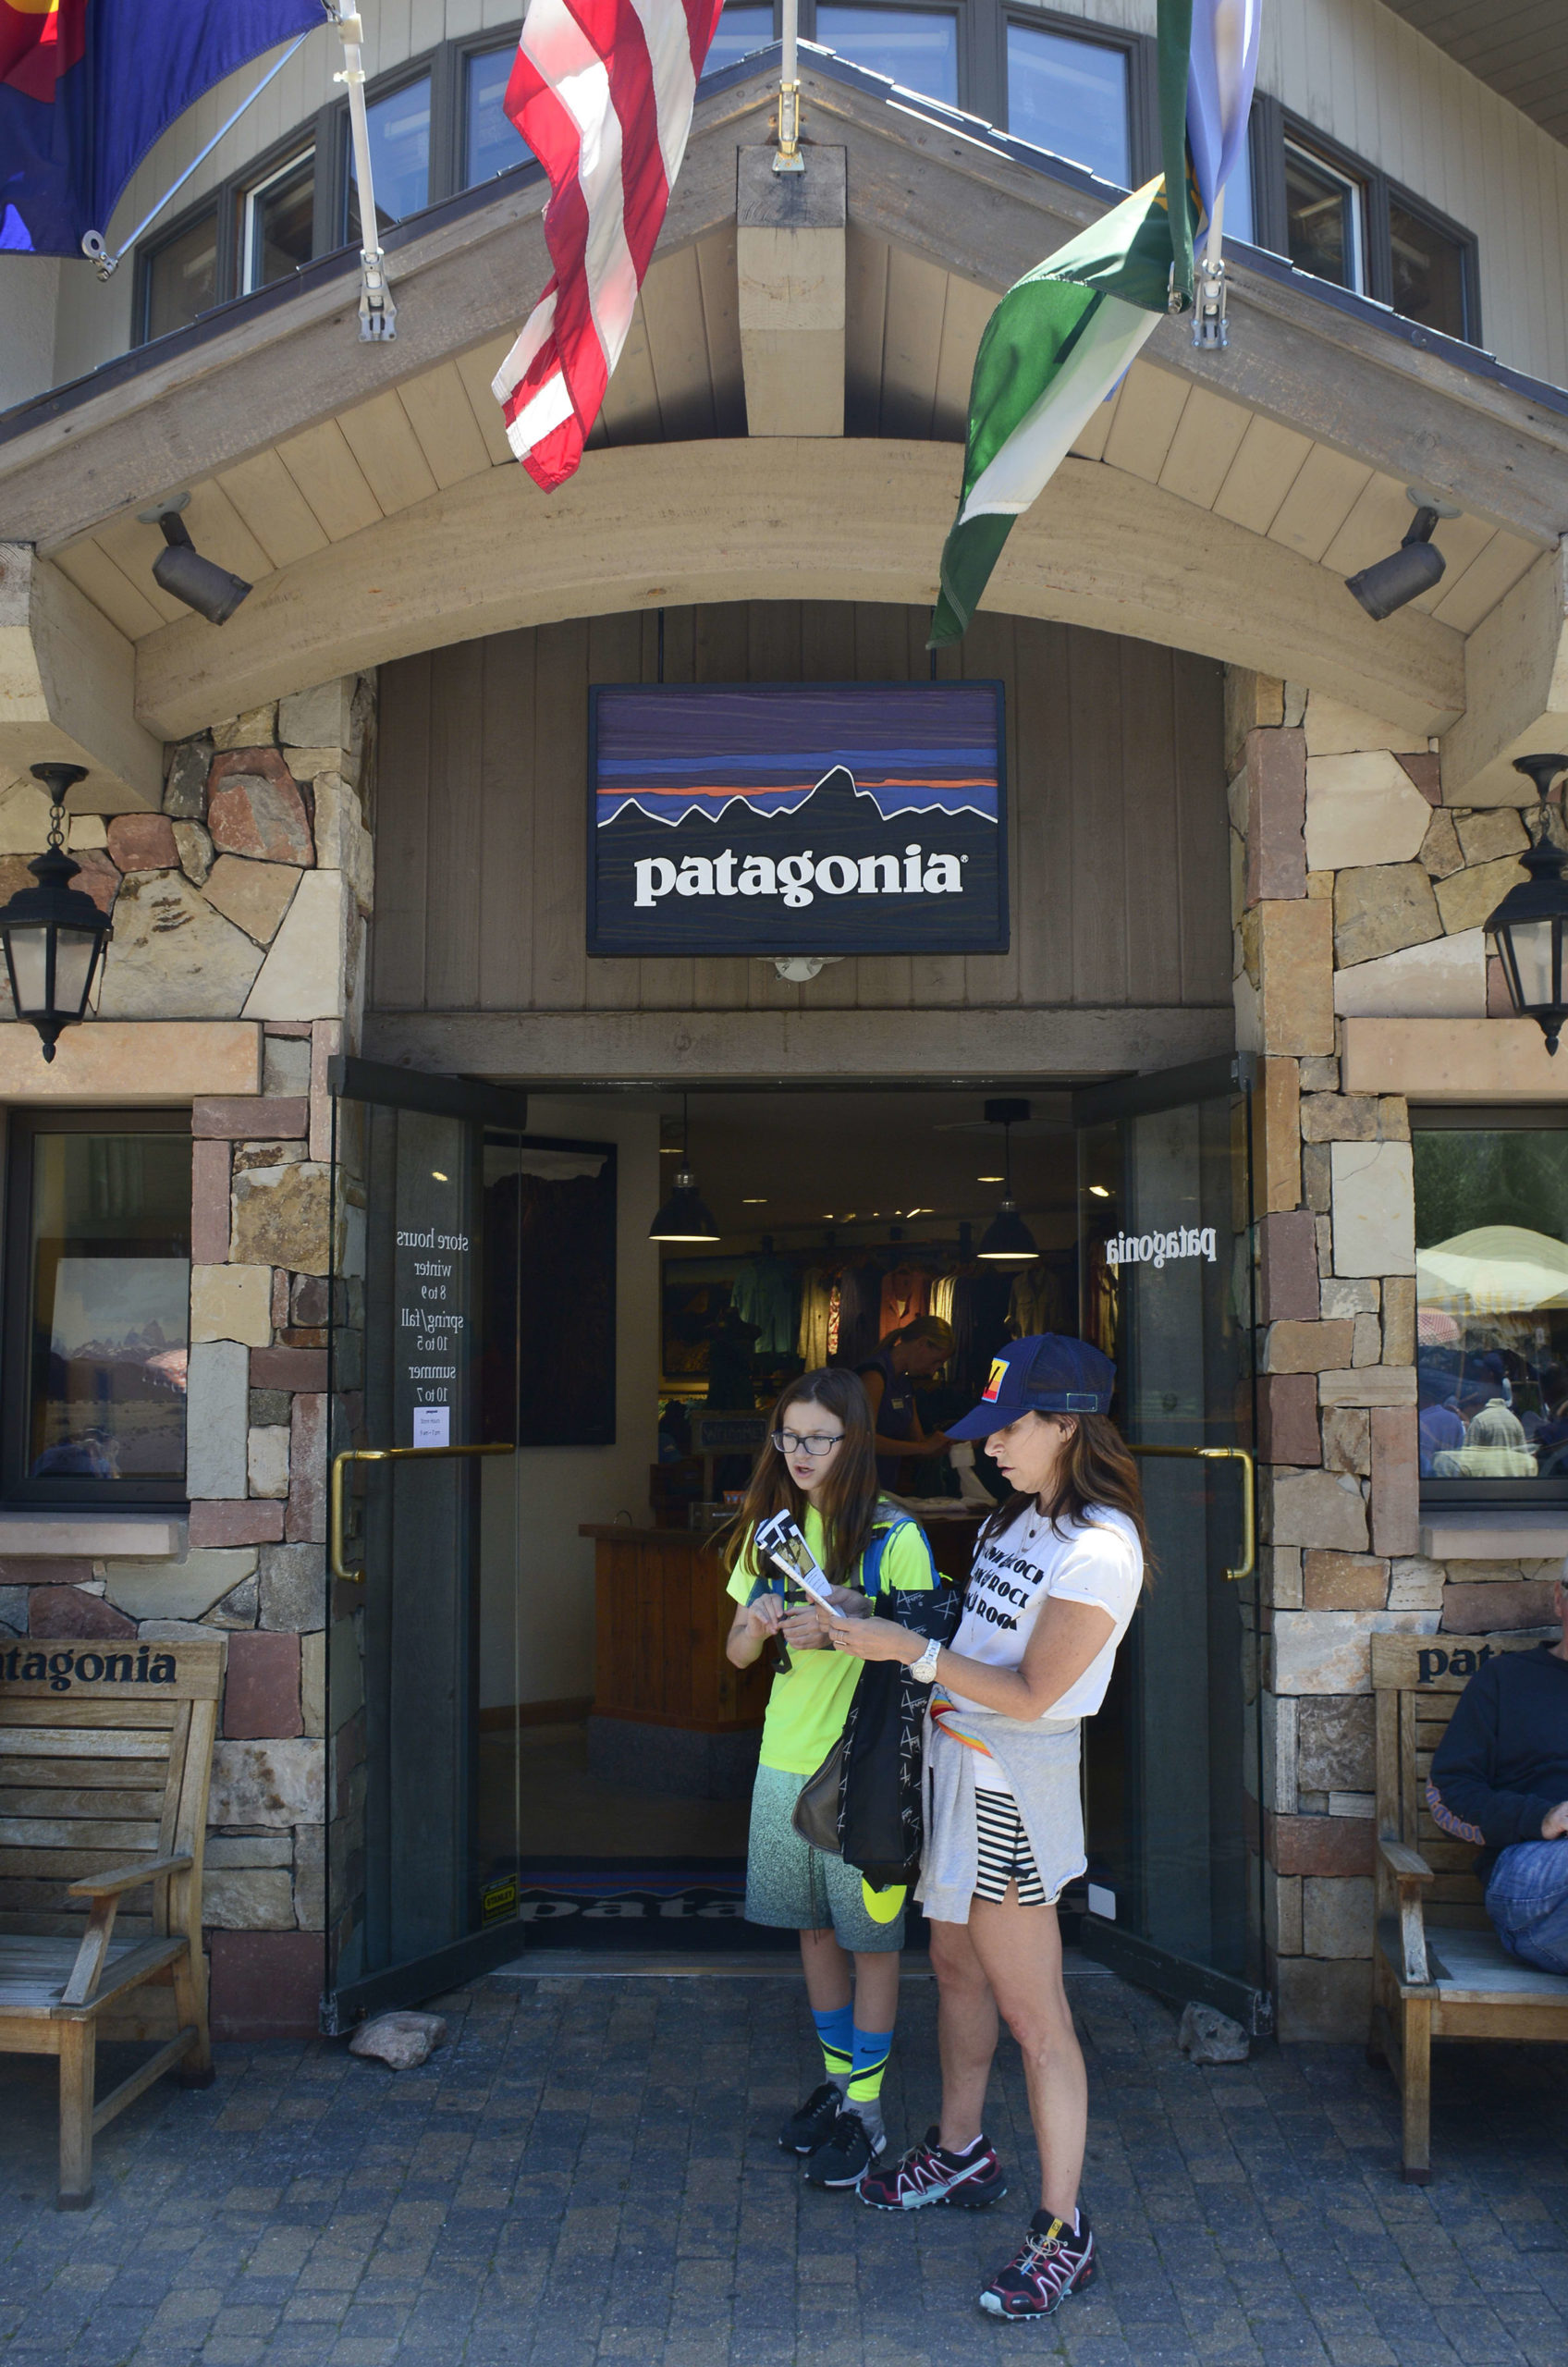 Patagonia clothes firm has hidden election message for purchasers